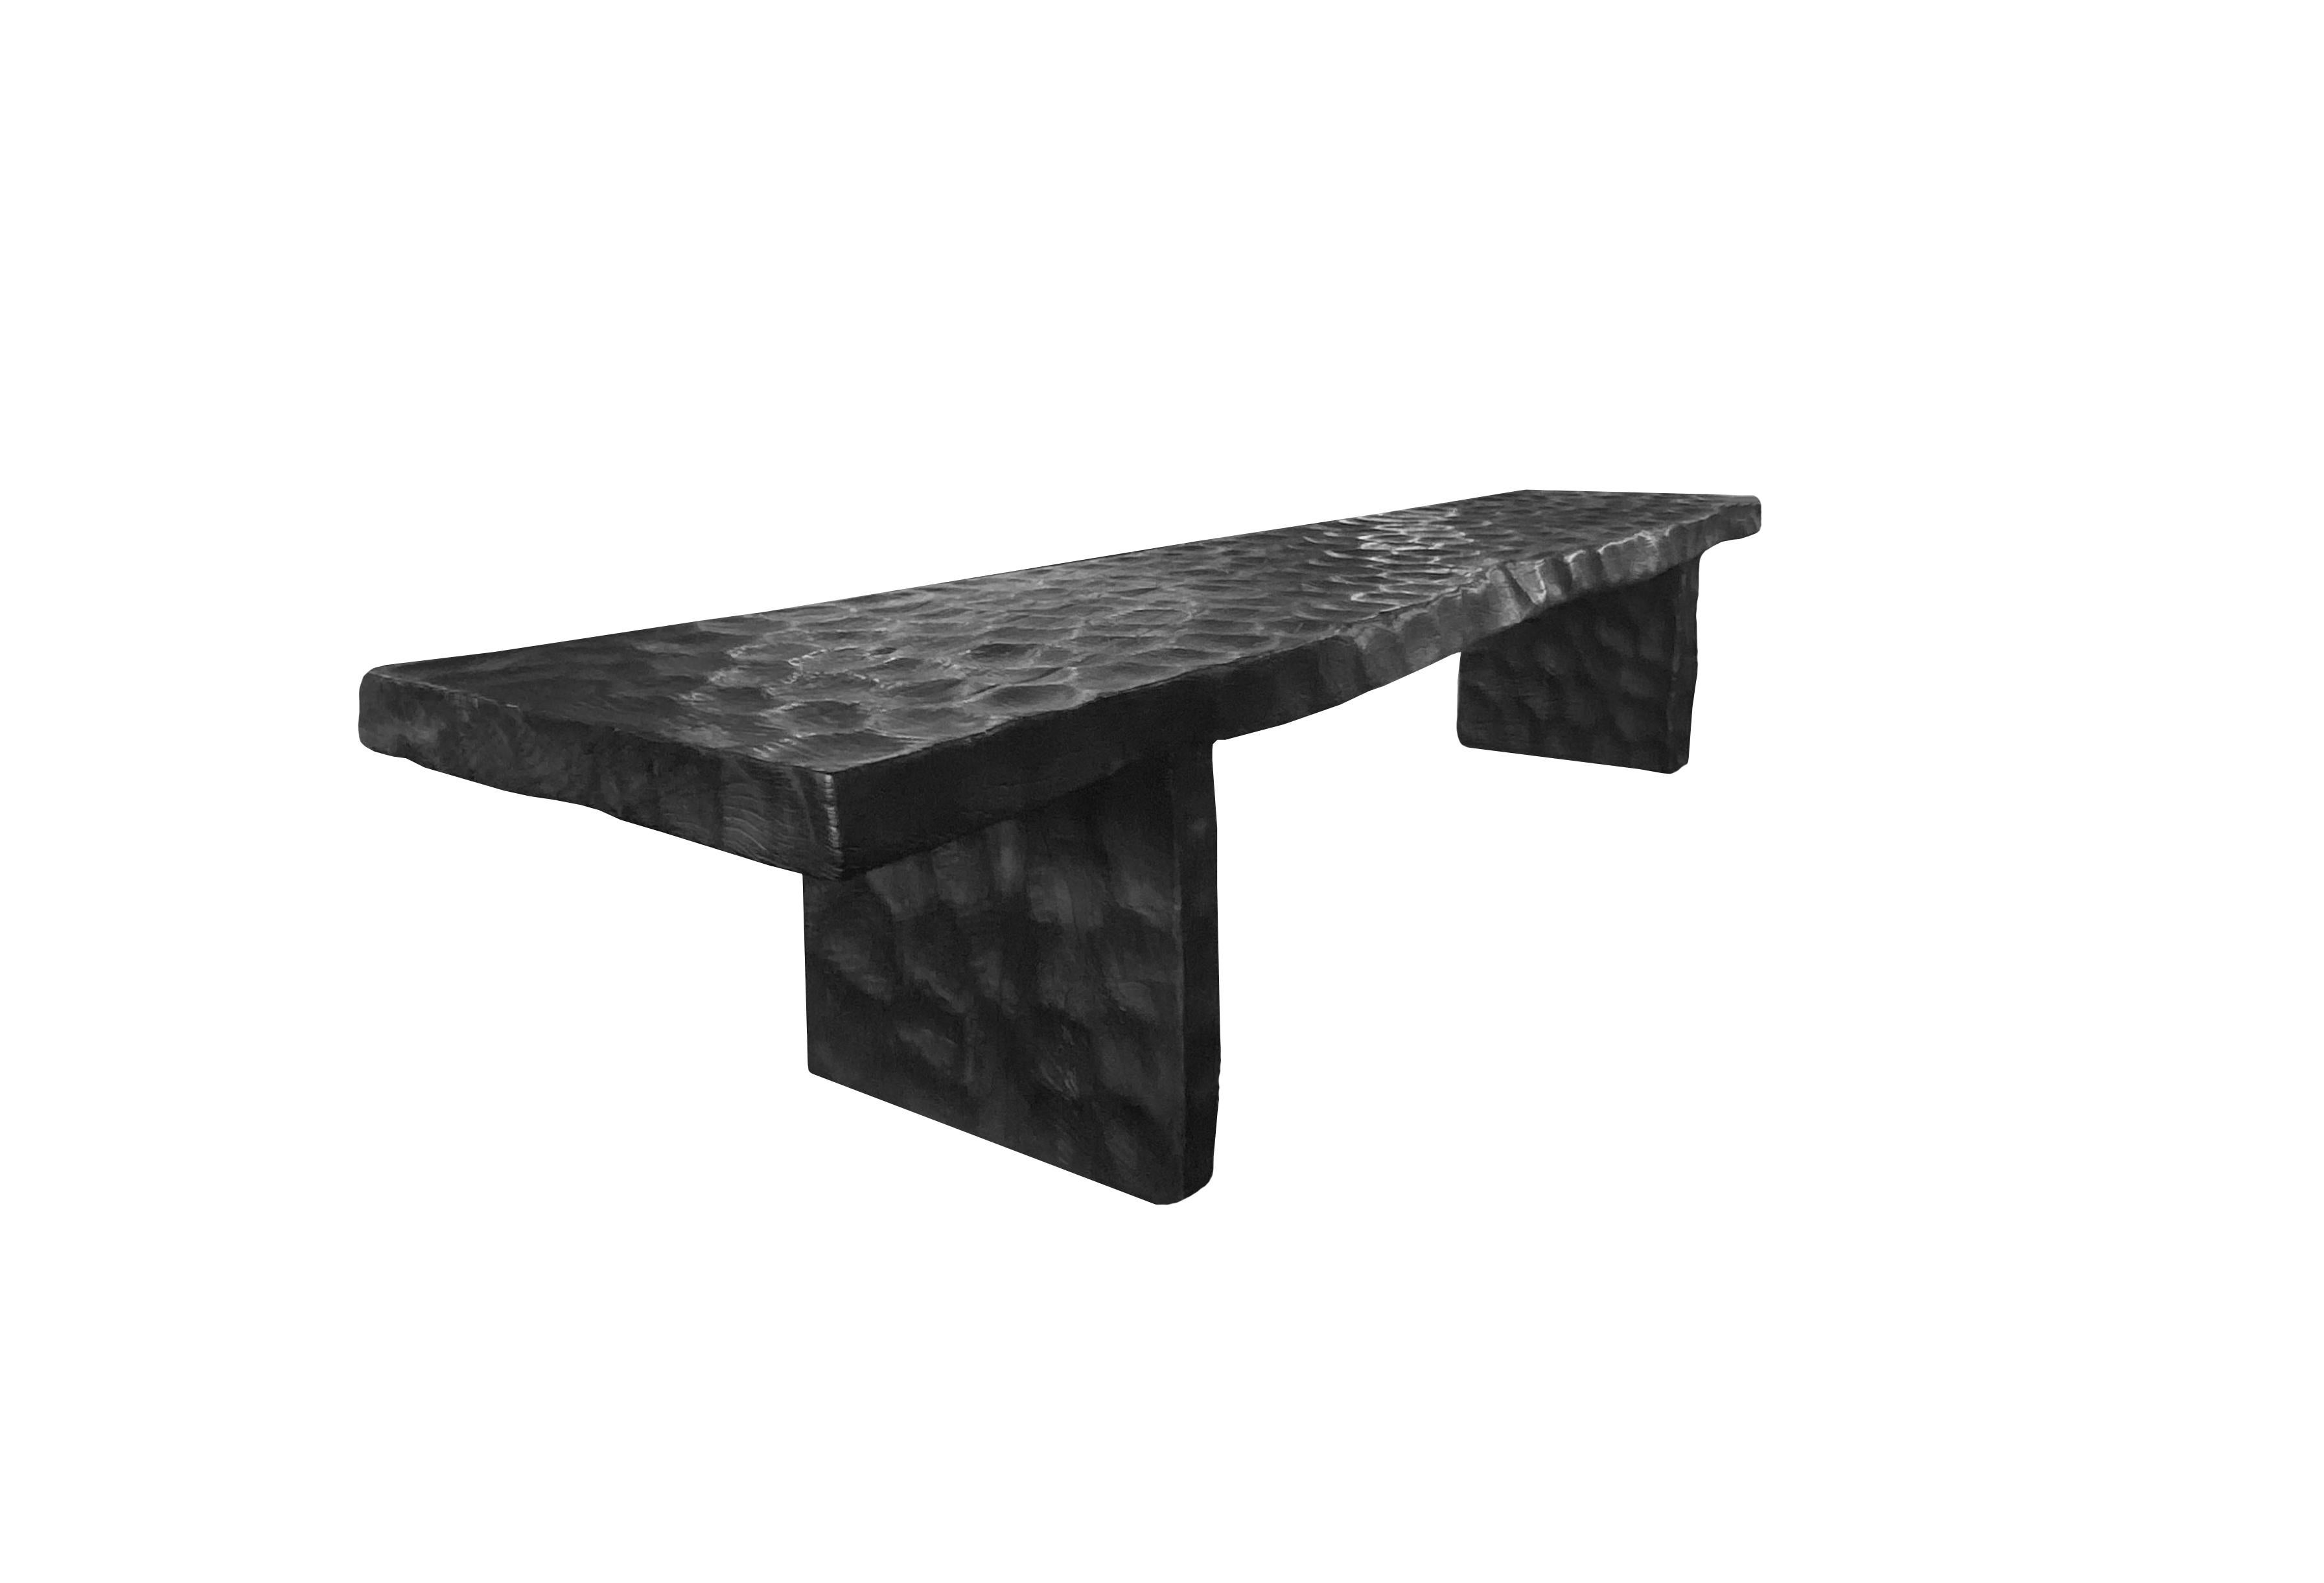 Other Sculptural Mango Wood Bench with Burnt Finish Modern Organic For Sale